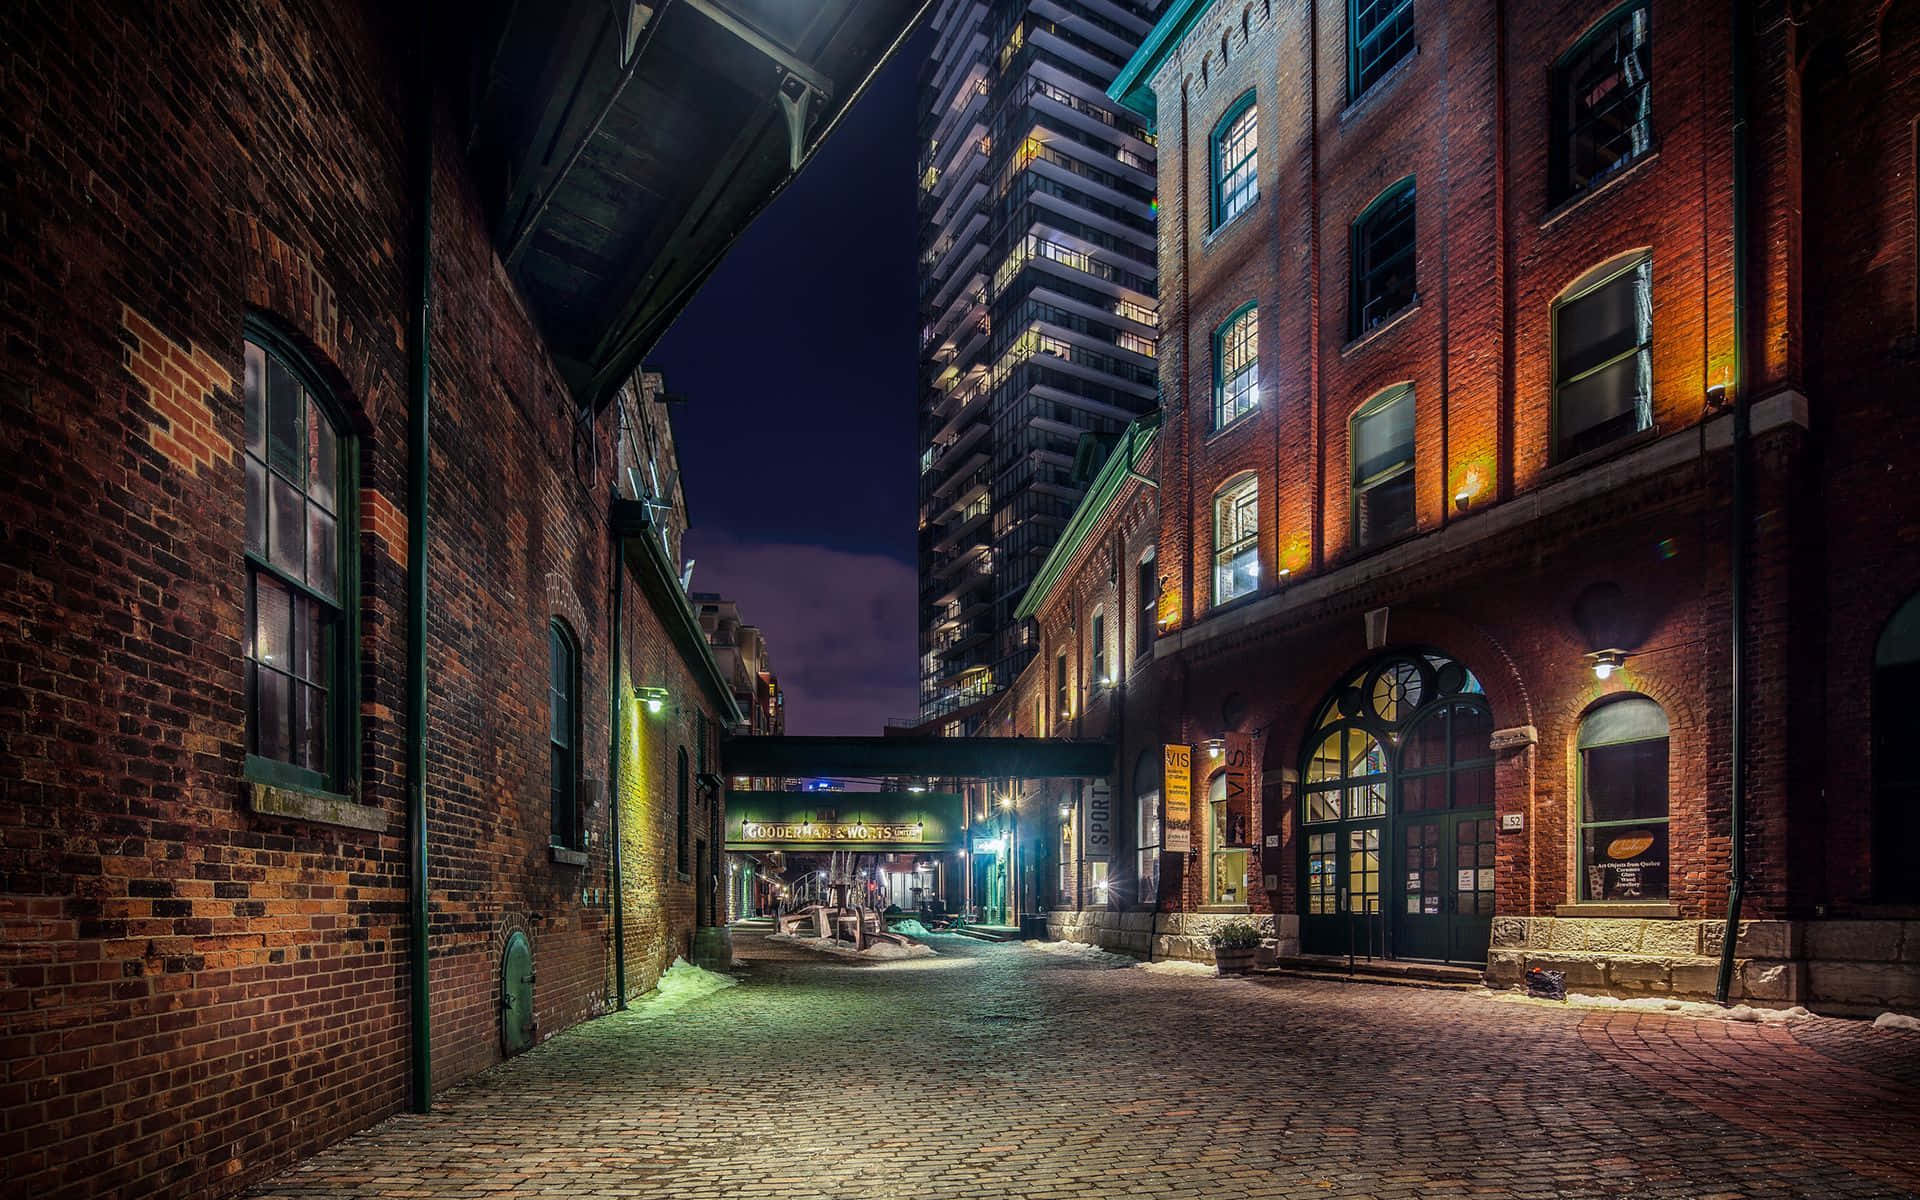 A Brick Alley With A Building In The Background